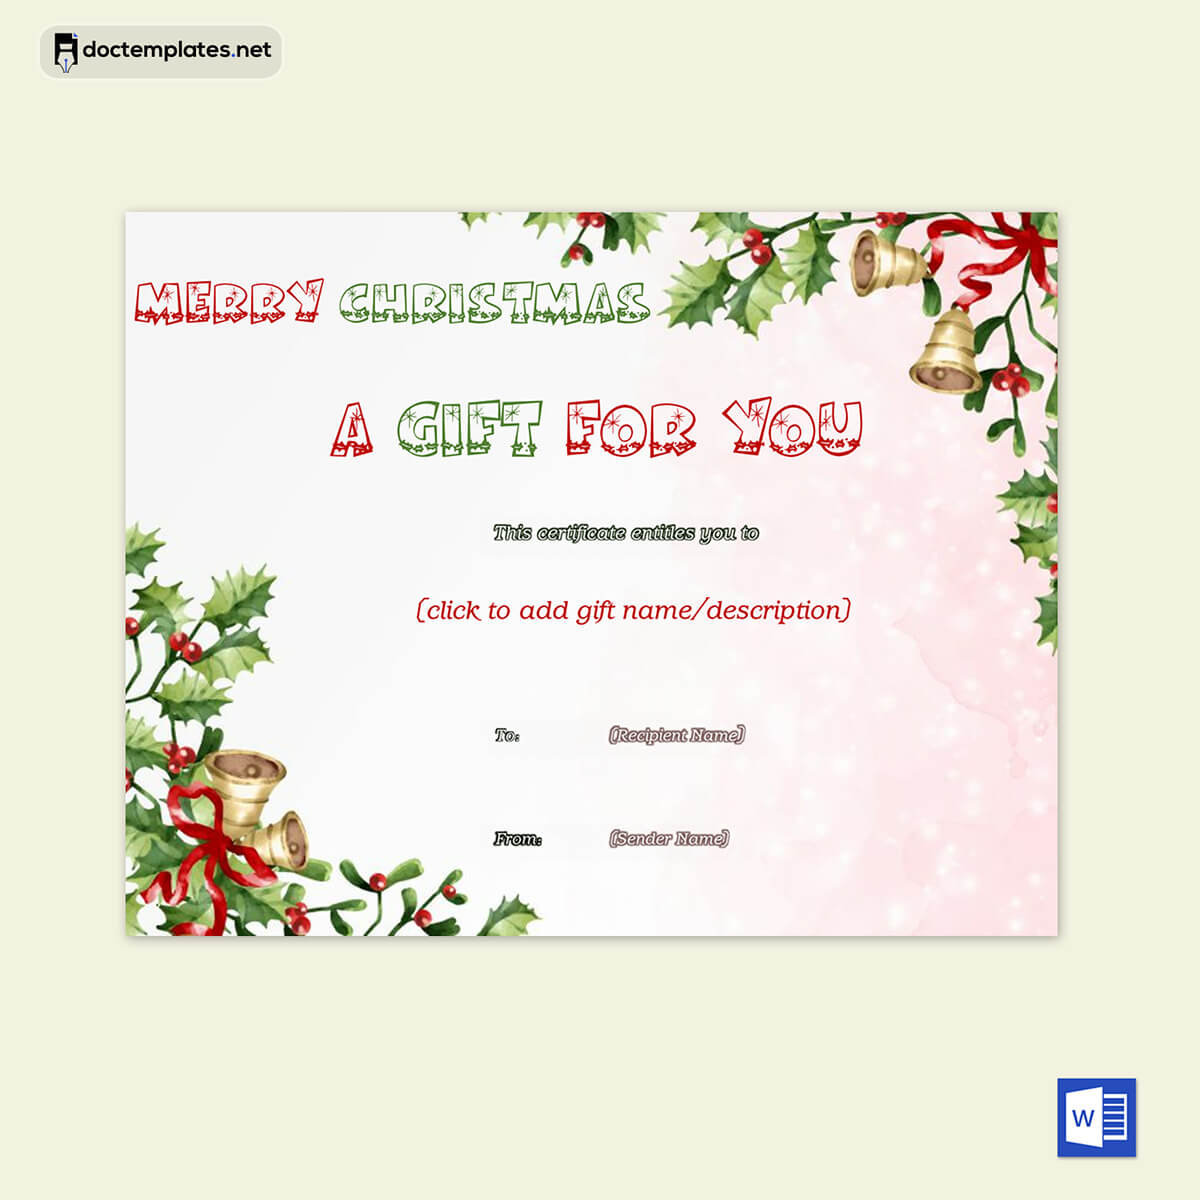 Image of Free holiday voucher template
Free holiday voucher template
04